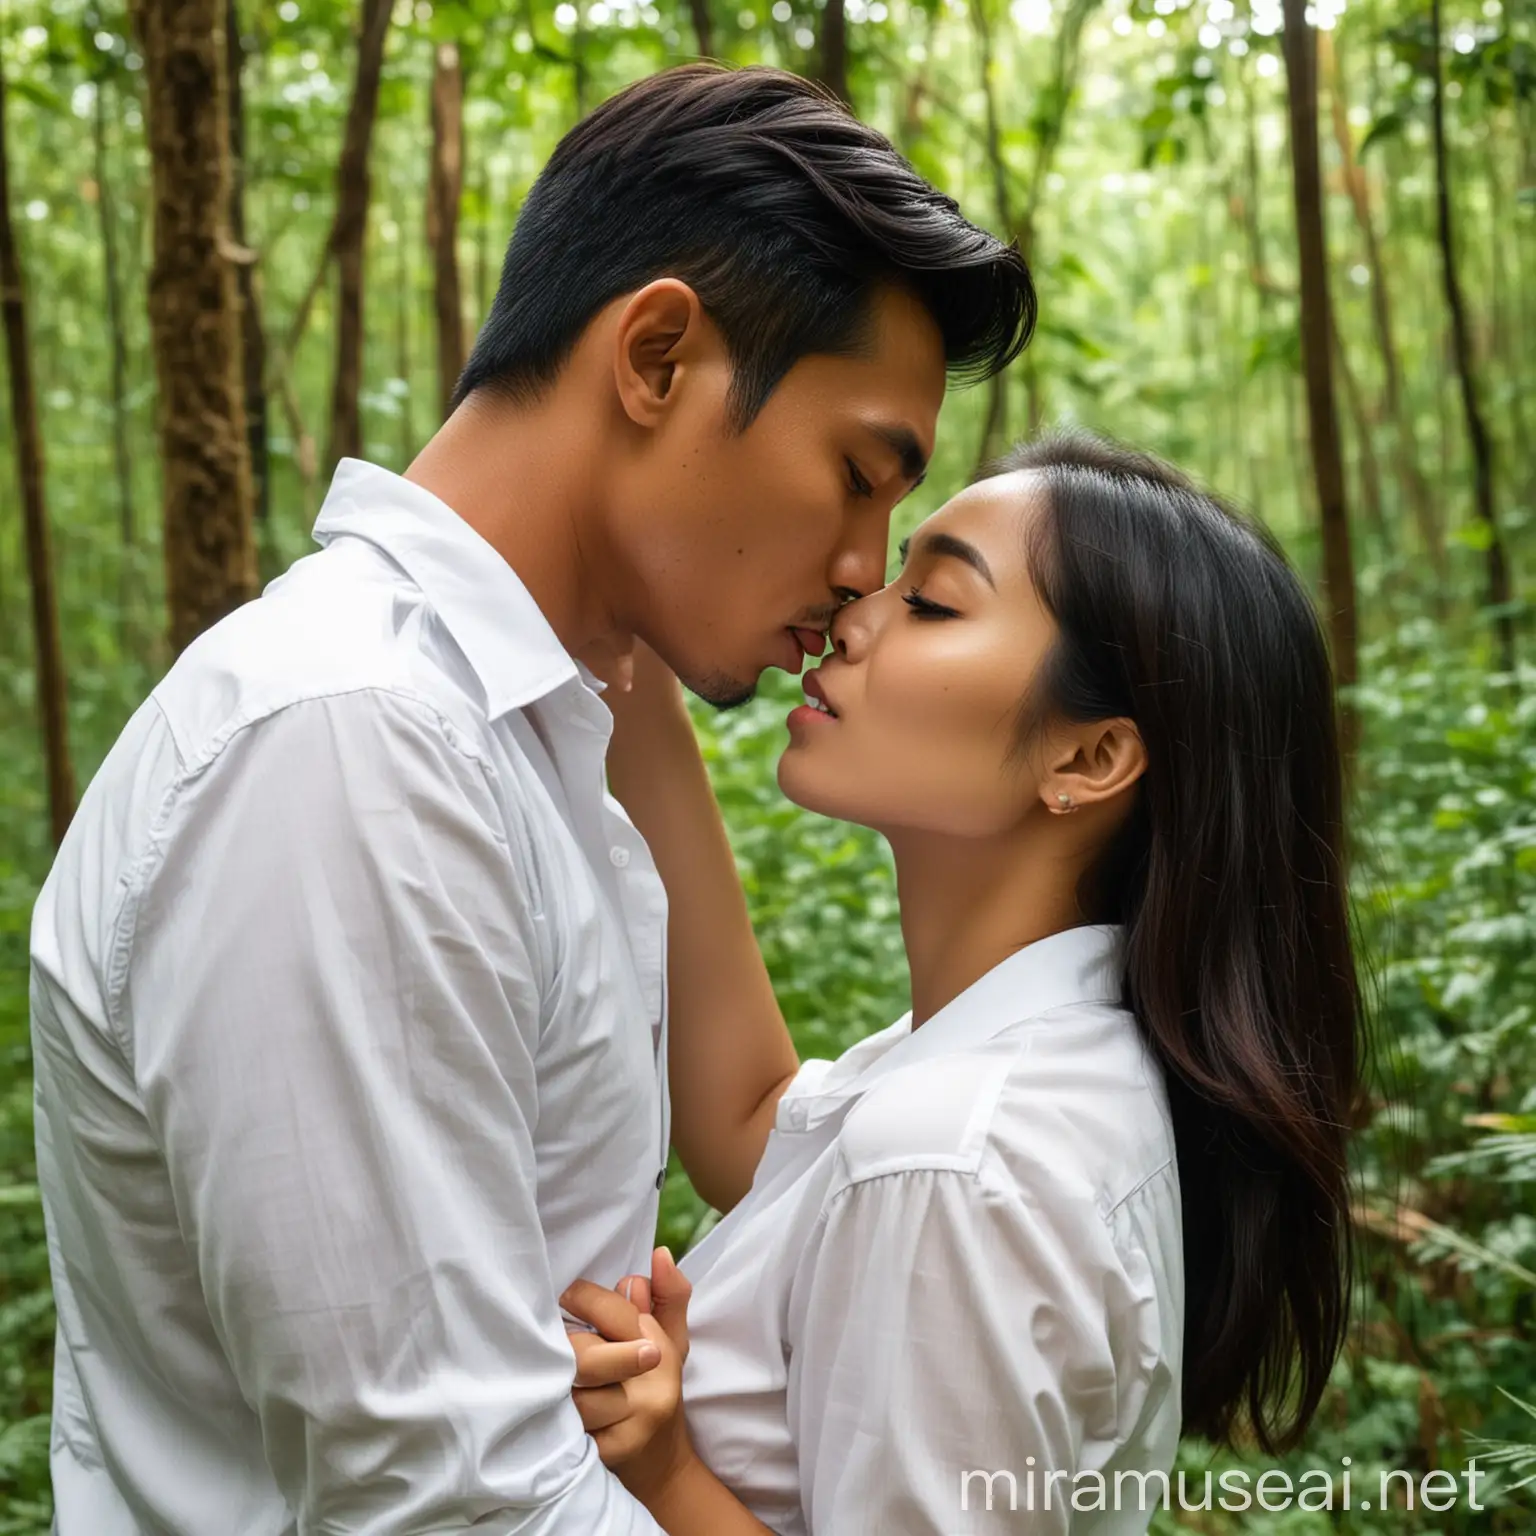 Romantic Indonesian Couple Kissing in Forest